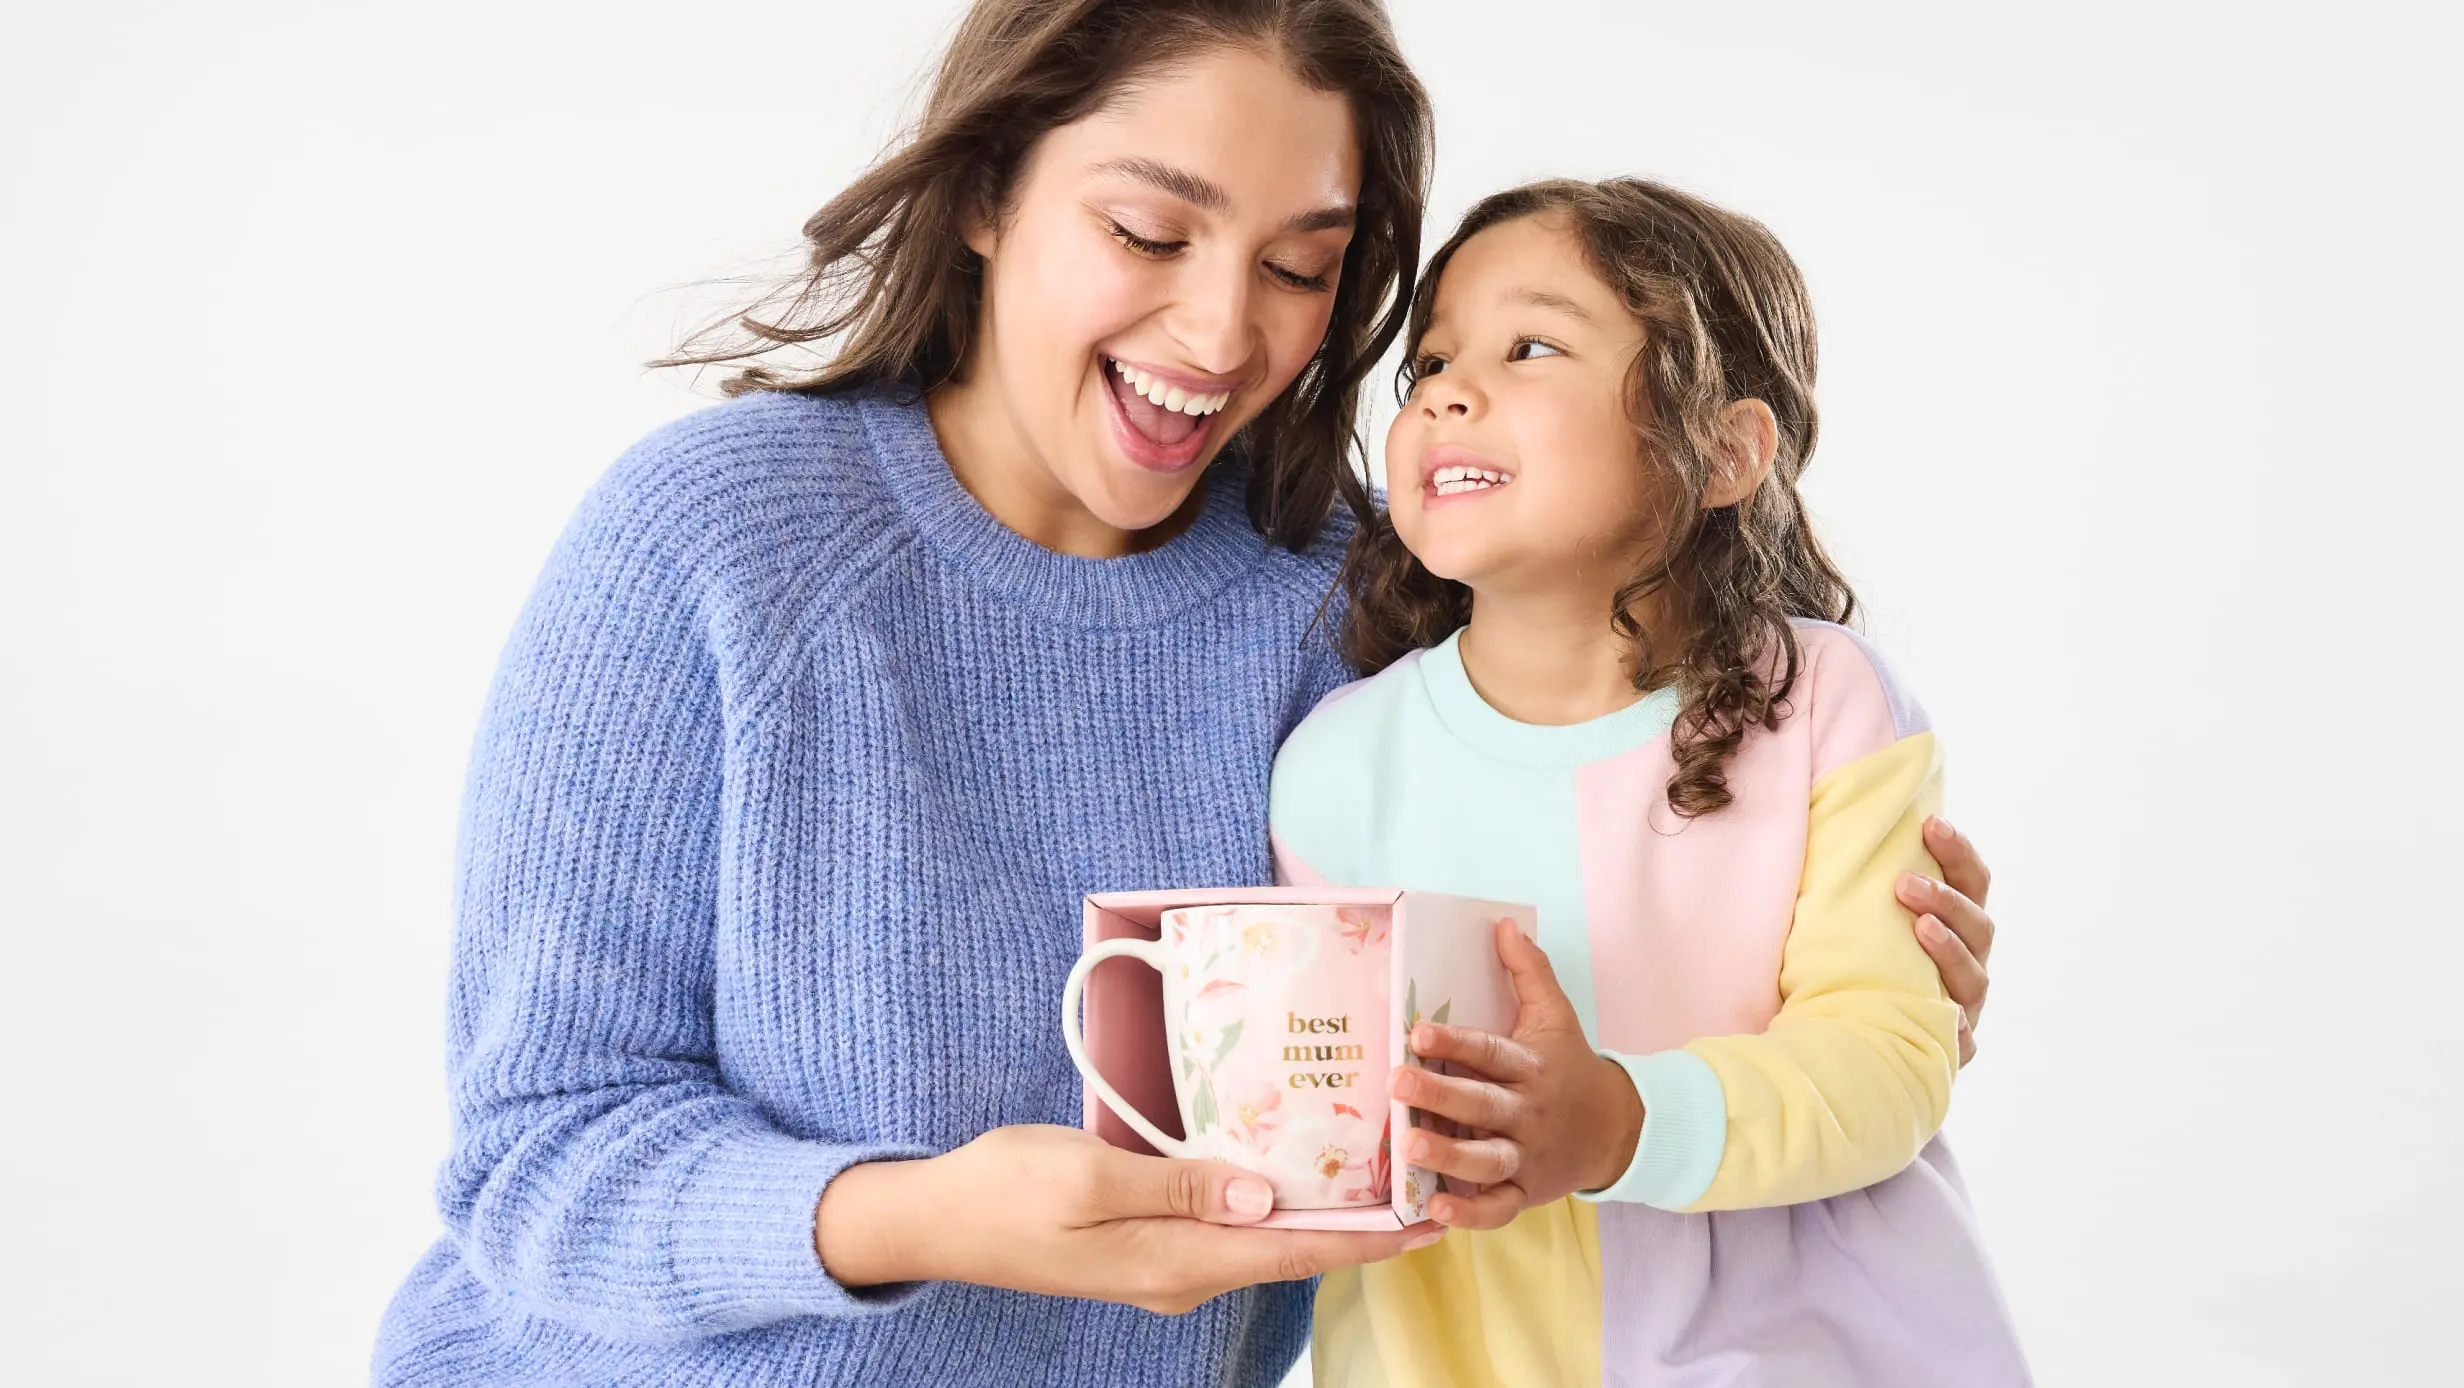 daughter gifting mum with a Kmart Mother's Day gift